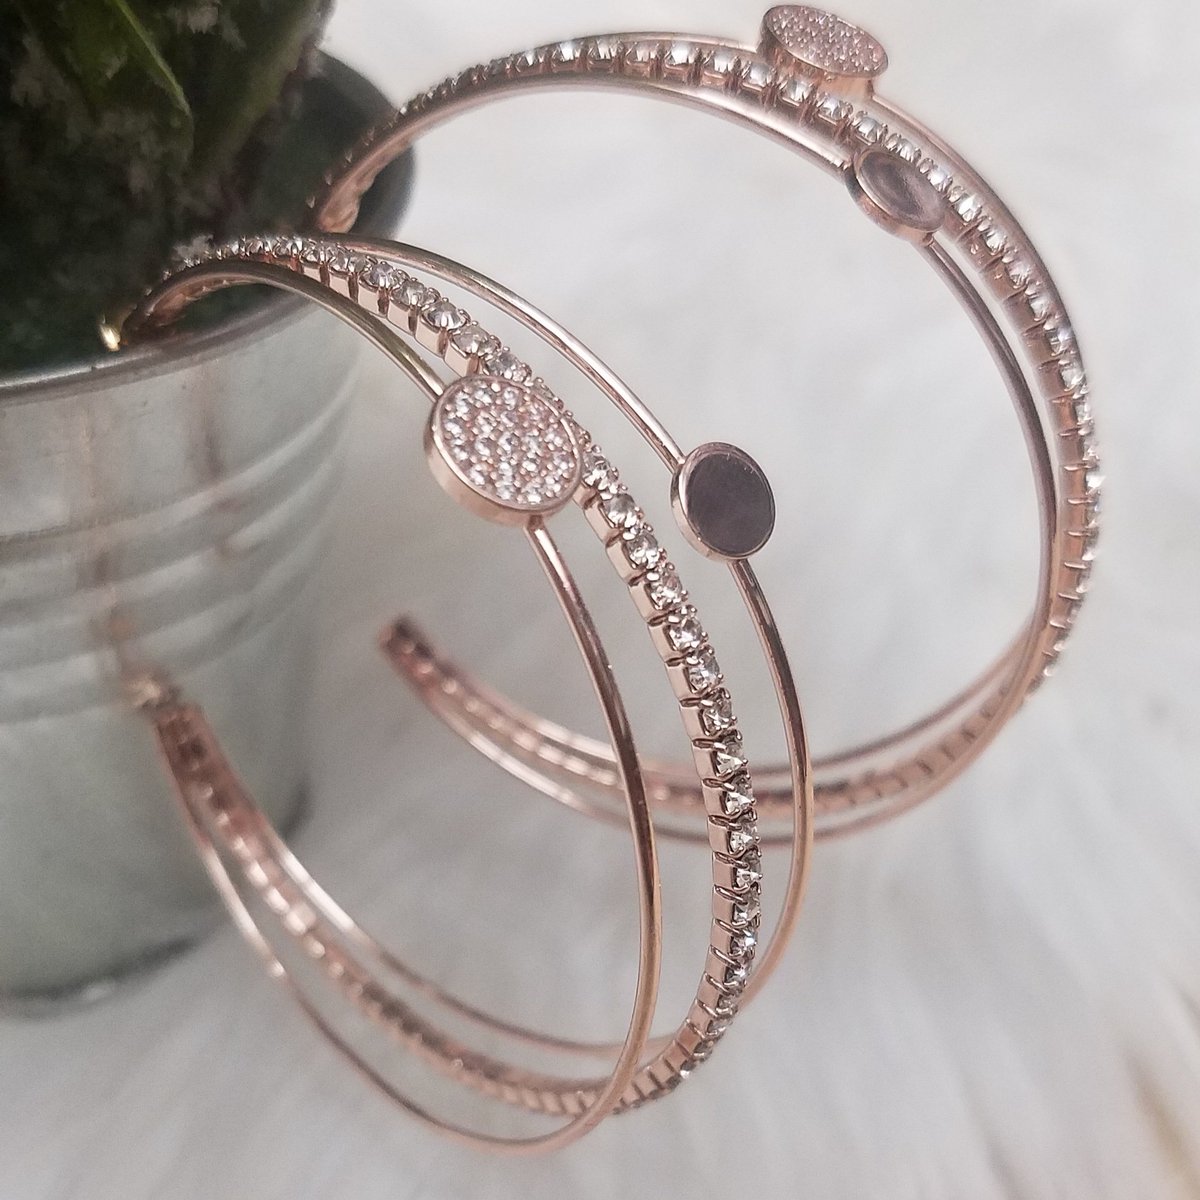 'Rose Hoops'
Available online and instore!!
Shipping or pickup available. Link in our Bio. #lovelyearrings #earings #rosegold #hoops #cute #sweet #lovelylooks #shoetique #rosehoops #lapuente #jewerly